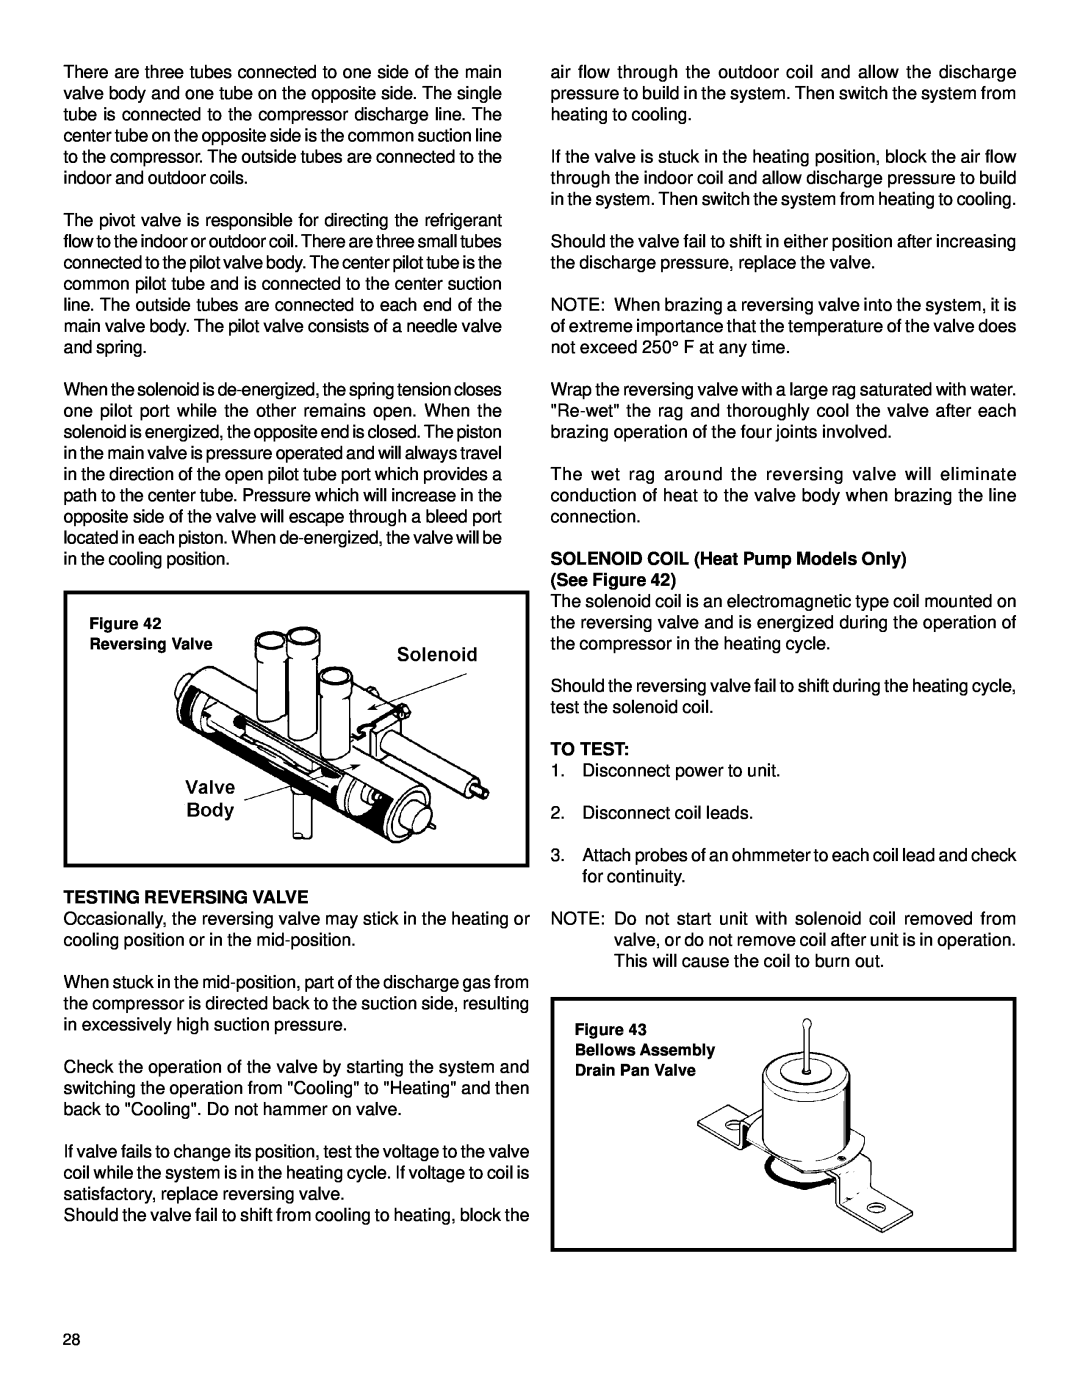 Friedrich racservmn service manual Testing Reversing Valve, SOLENOID COIL Heat Pump Models Only See Figure, To Test 